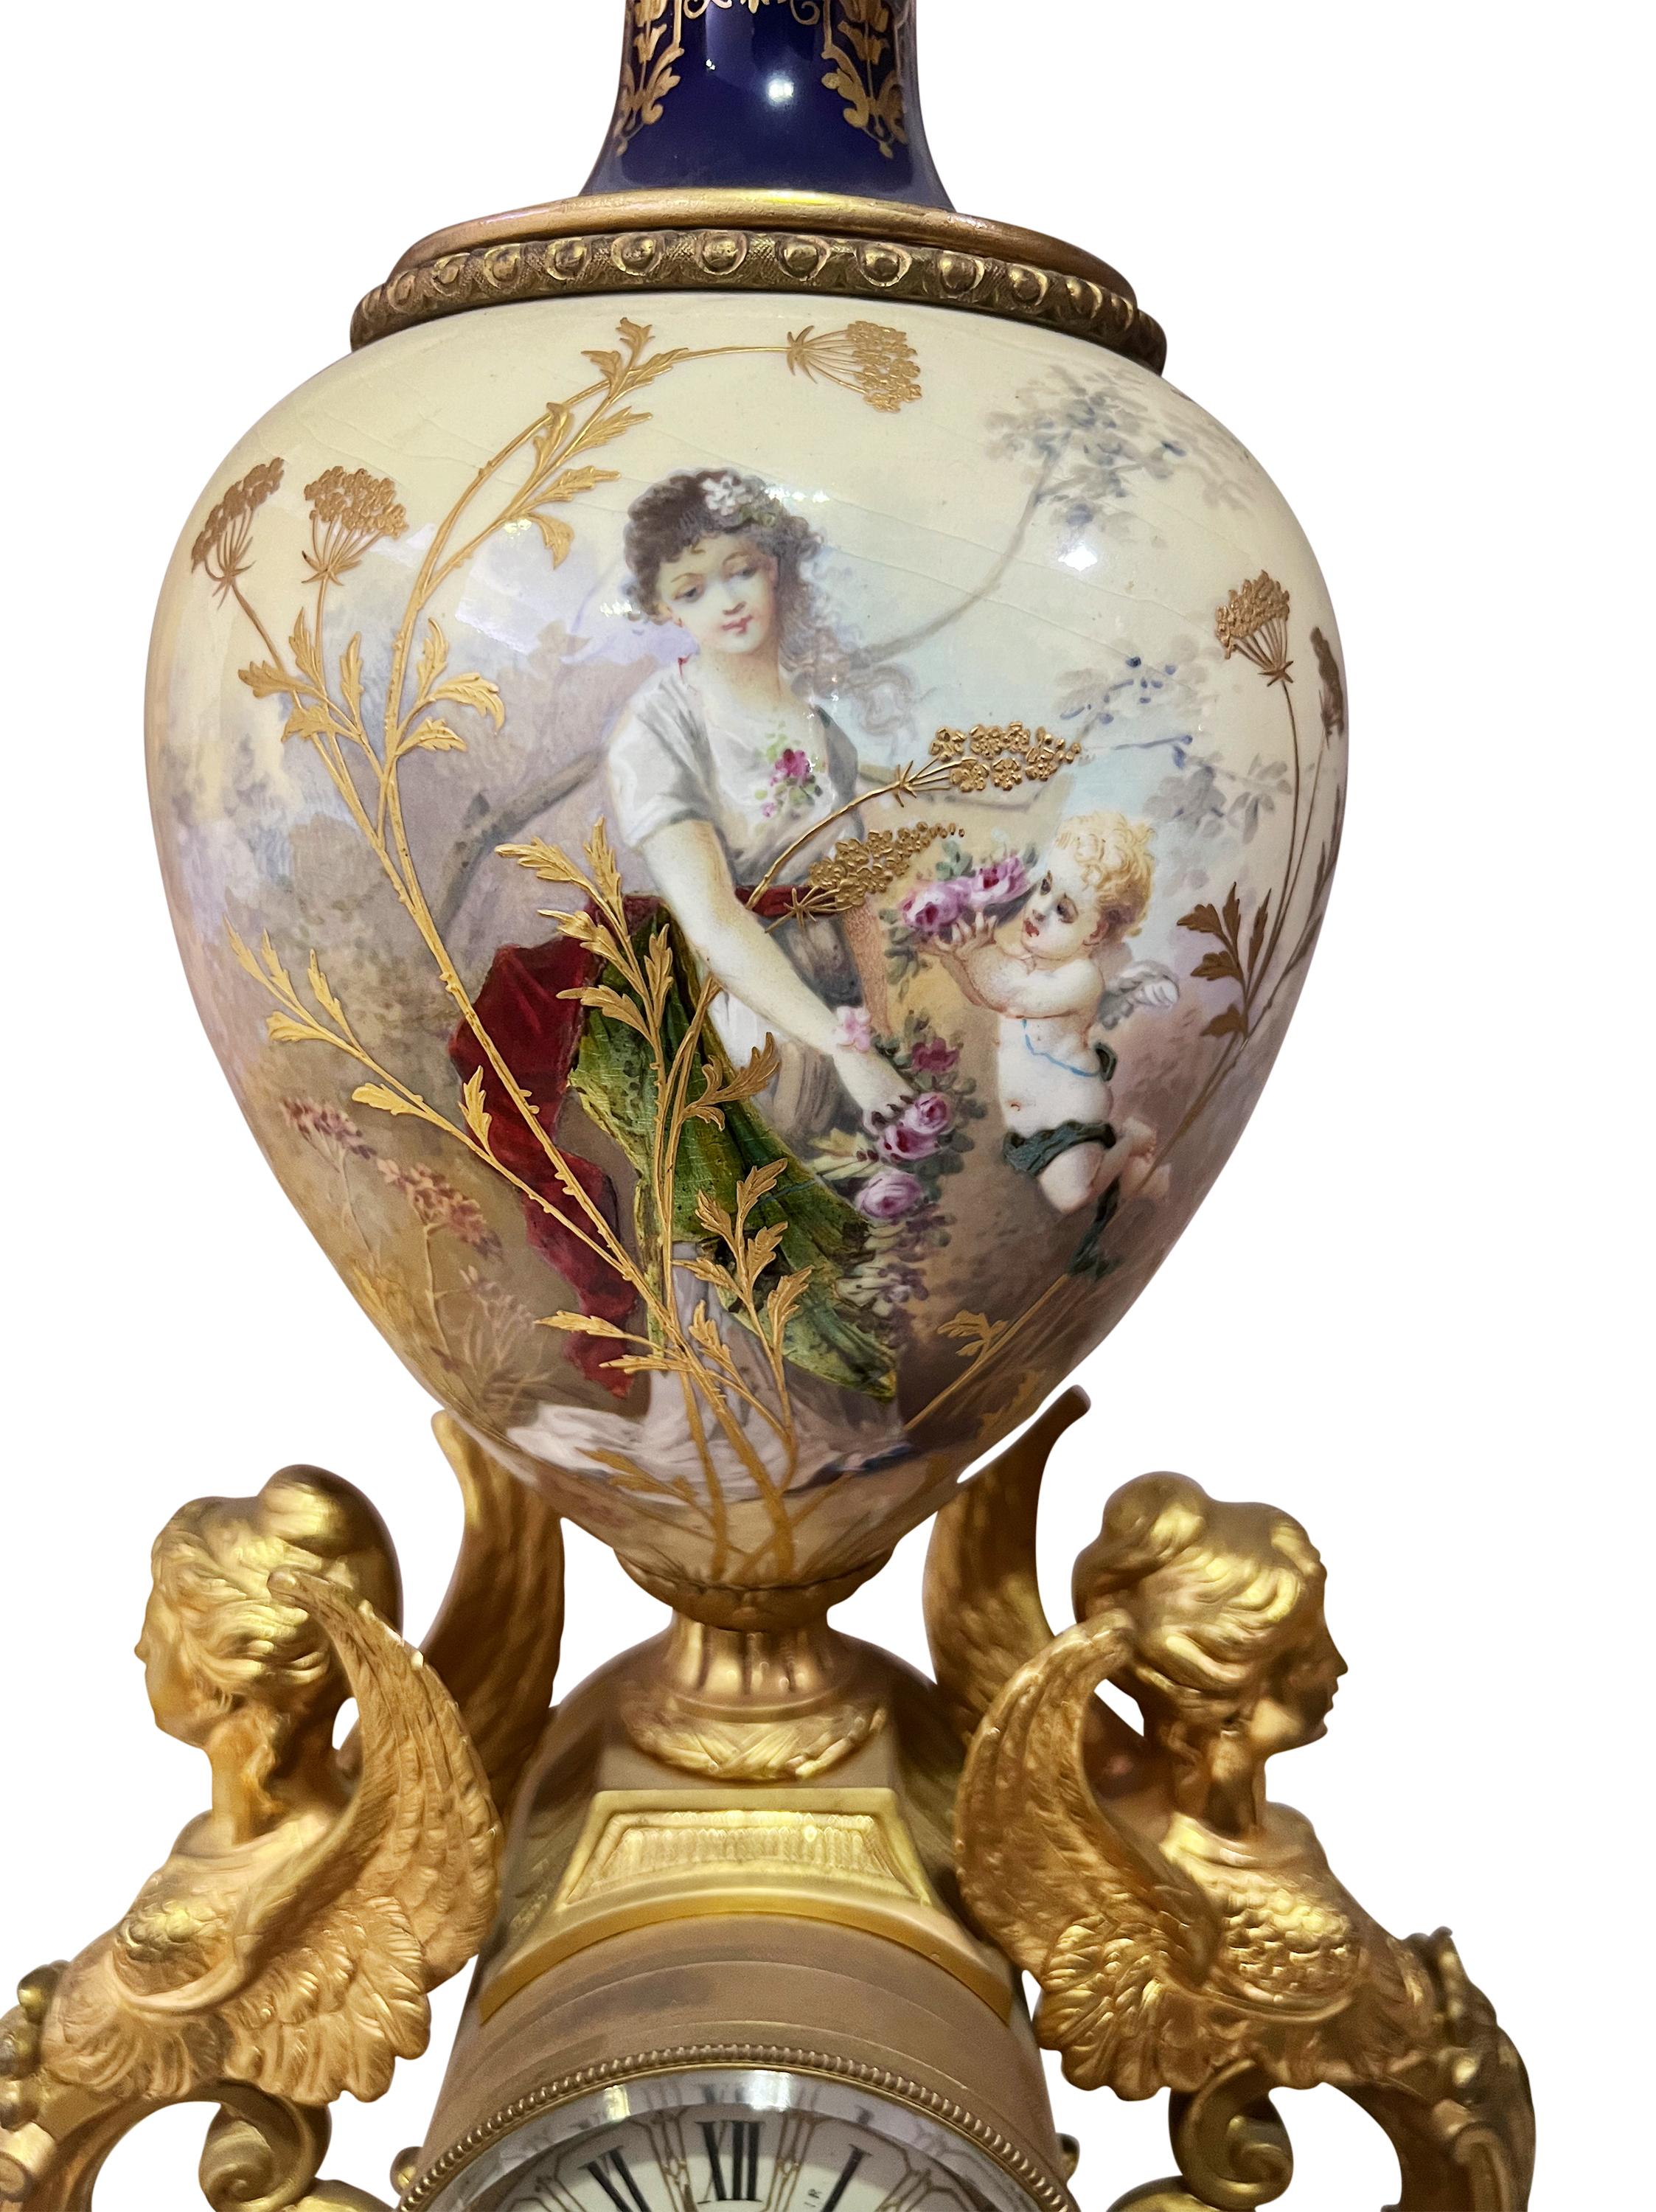 A 19th Century French Ormolu Bronze & Porcelain Figural Mantel Clock Retailed by Tiffany & Co.

Having an ormolu case with two winged maidens centered by the porcelain dial with Roman Numerals. 
The bottom of the dial marked Tiffany & Co. New York.